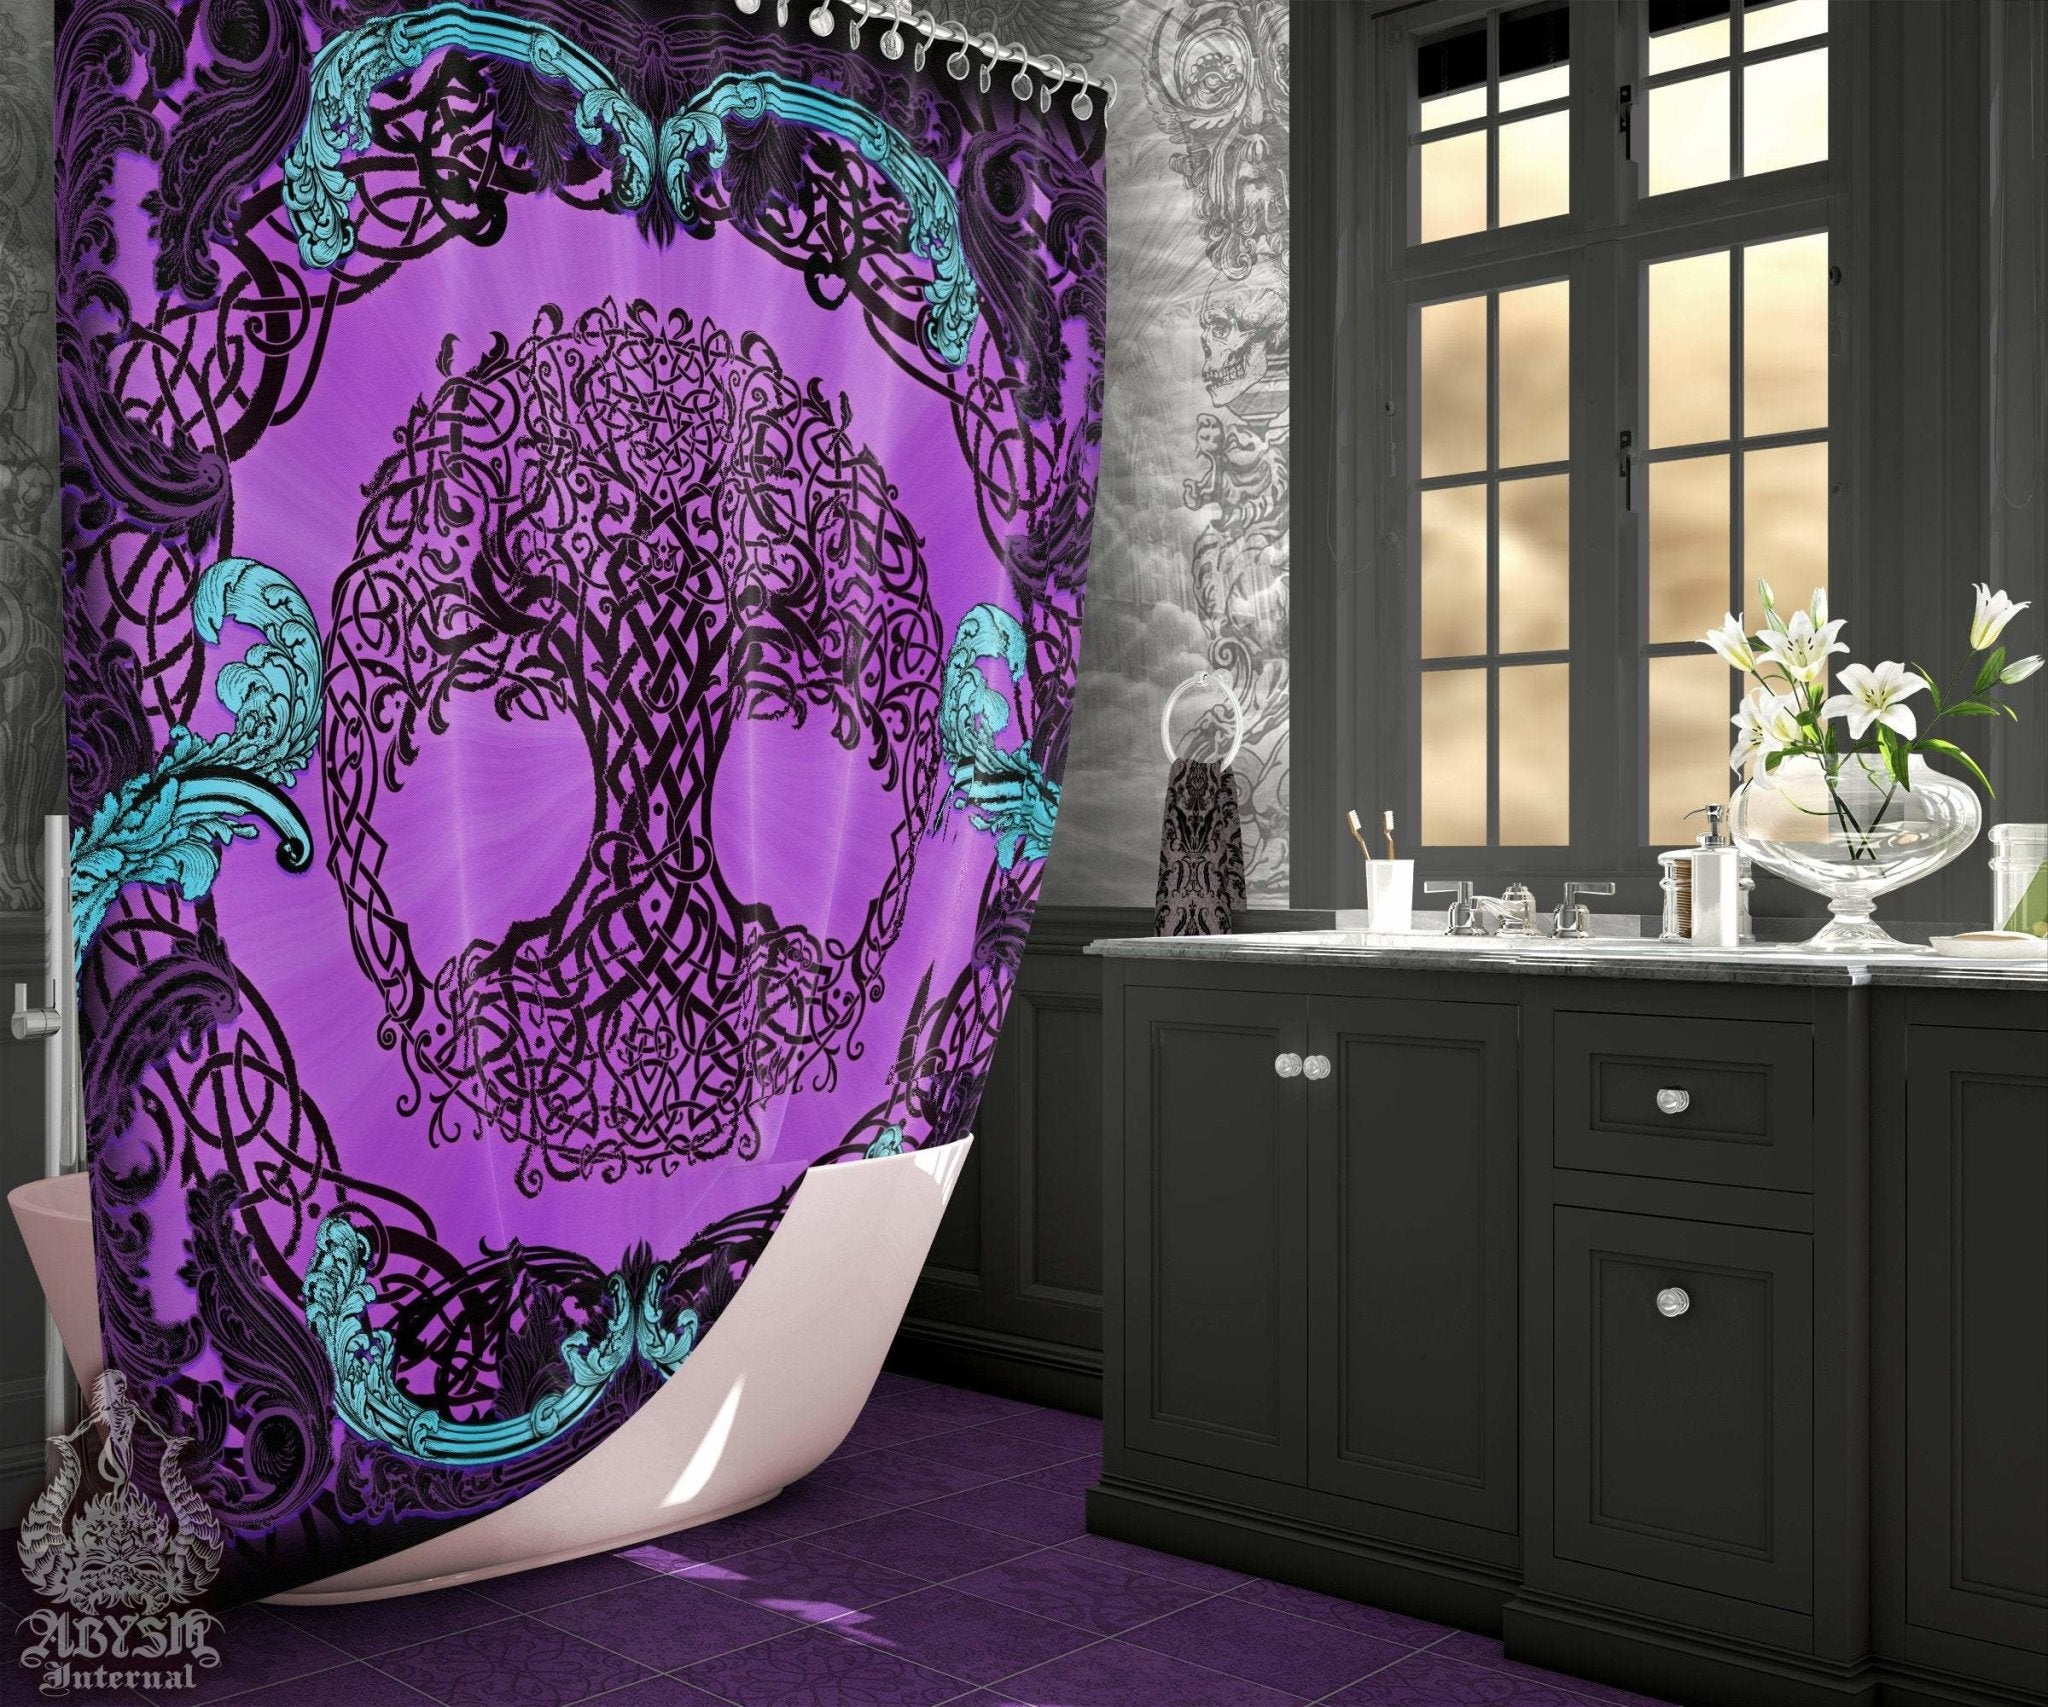 Witch Shower Curtain, Tree of Life, Gothic Bathroom Decor, Pagan, Celtic Knot, Eclectic and Funky Home - Pastel Goth, Purple - Abysm Internal